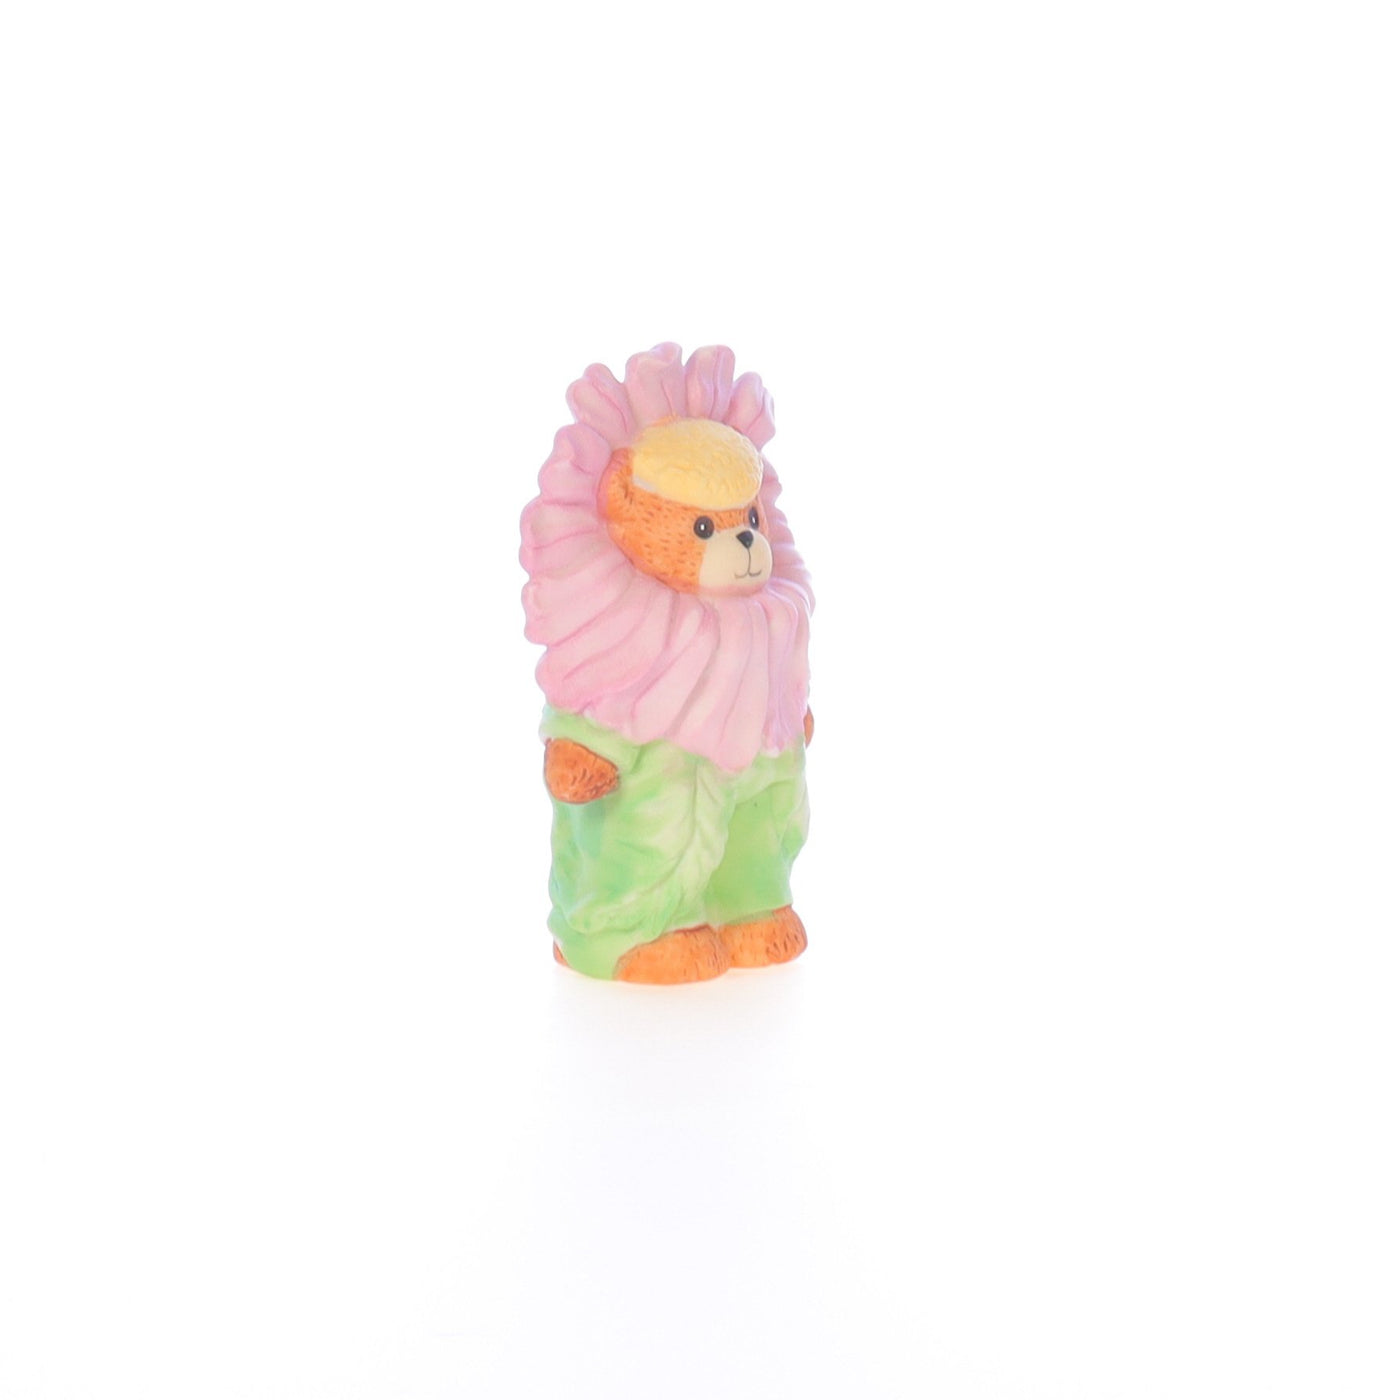 Lucy_And_Me_by_Lucy_Atwell_Porcelain_Figurine_Bear_with_Pink_and_Green_Flower_Costume_Lucy_Unknown_012_08